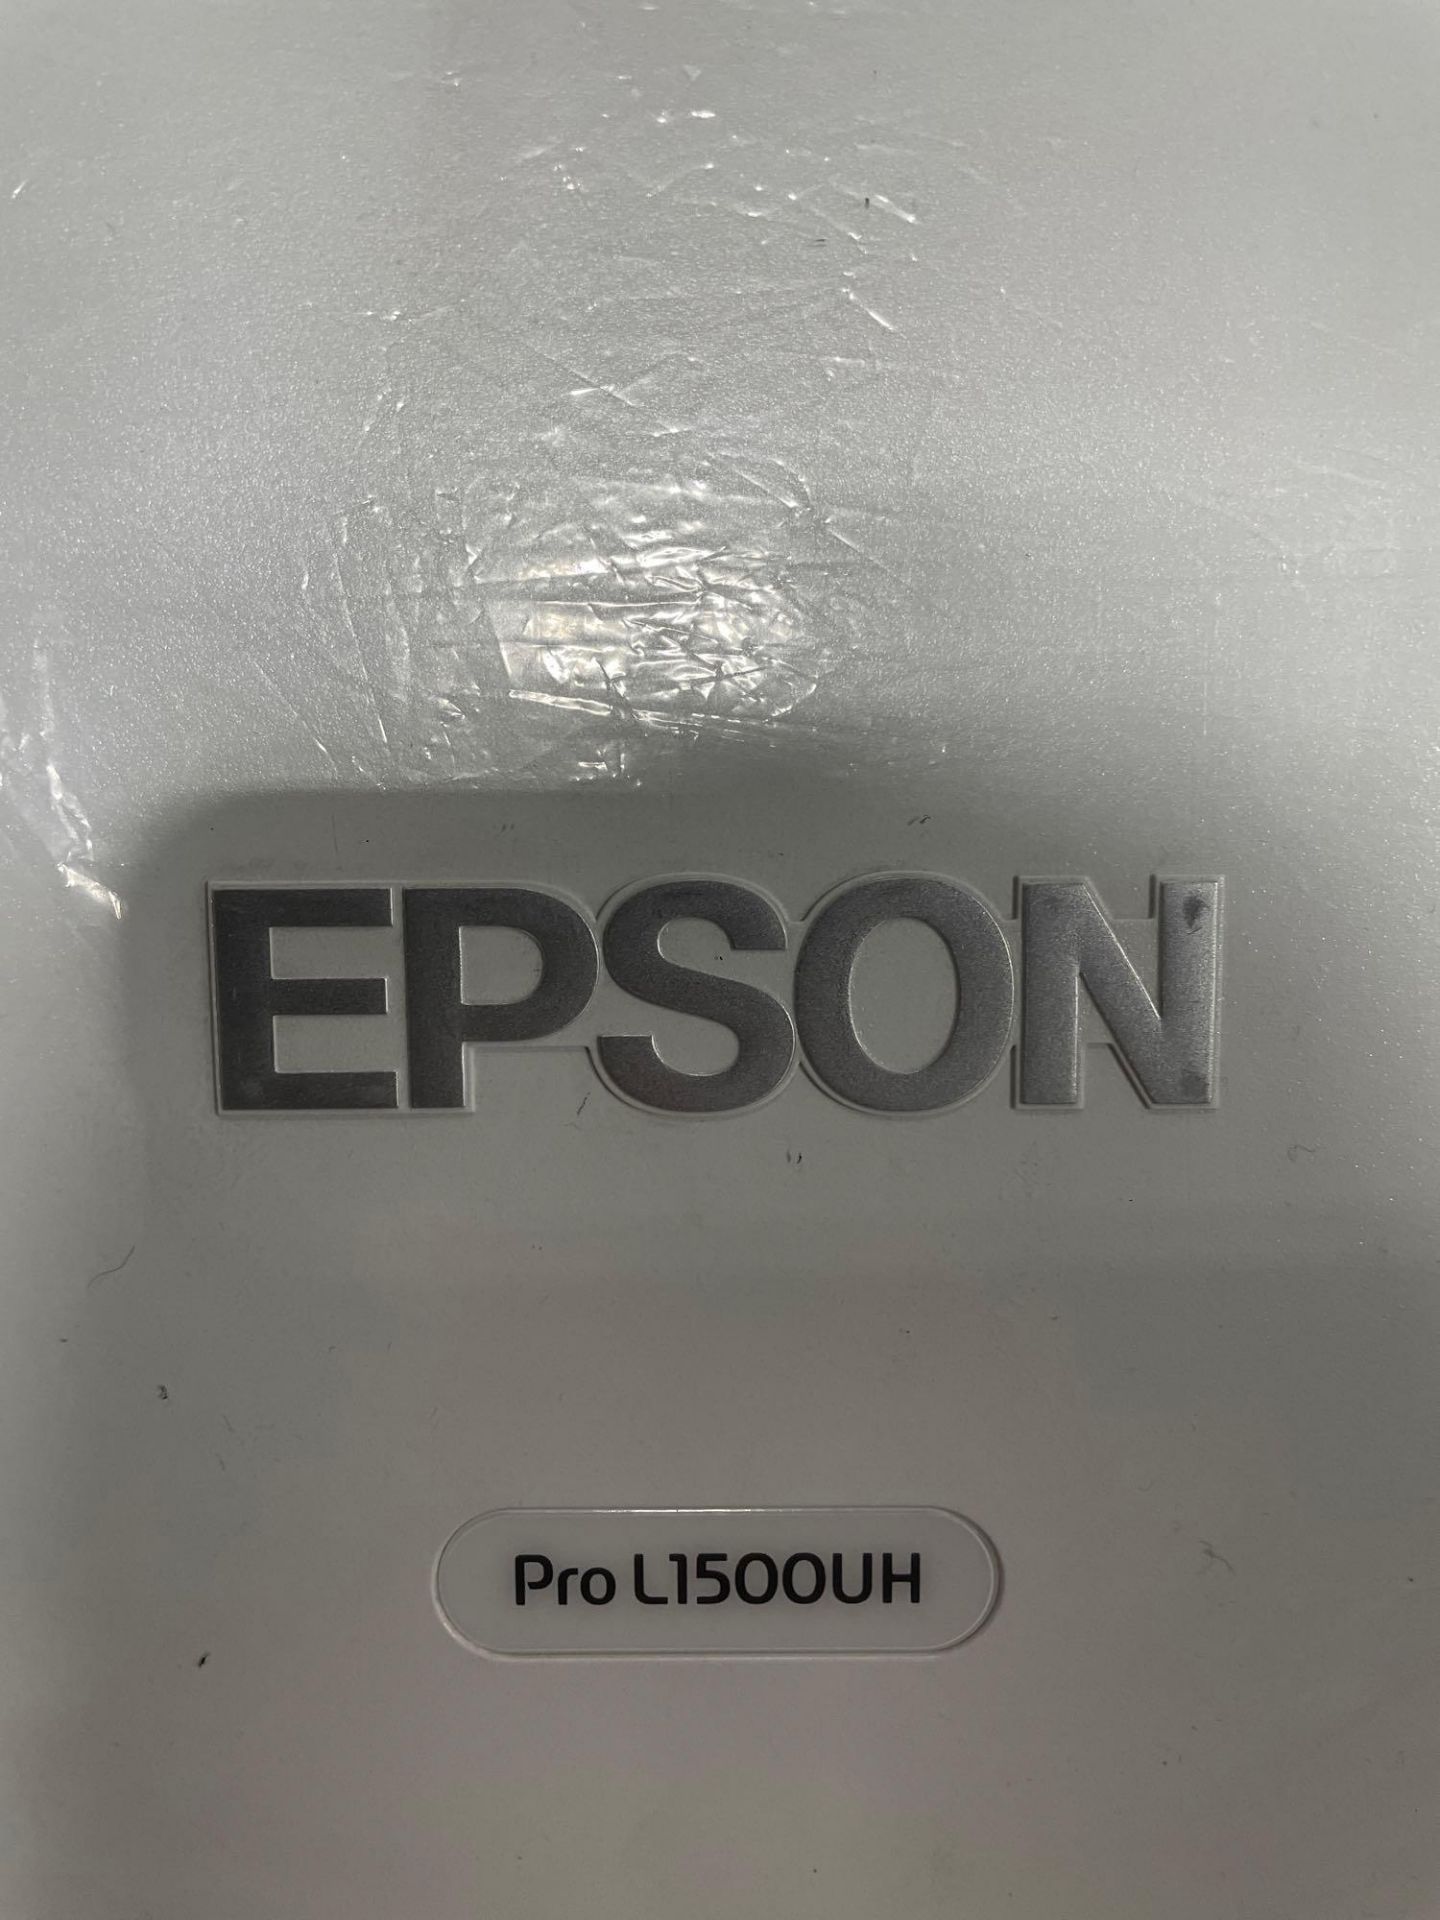 Epson PRO L1500UH Projector - Image 2 of 6